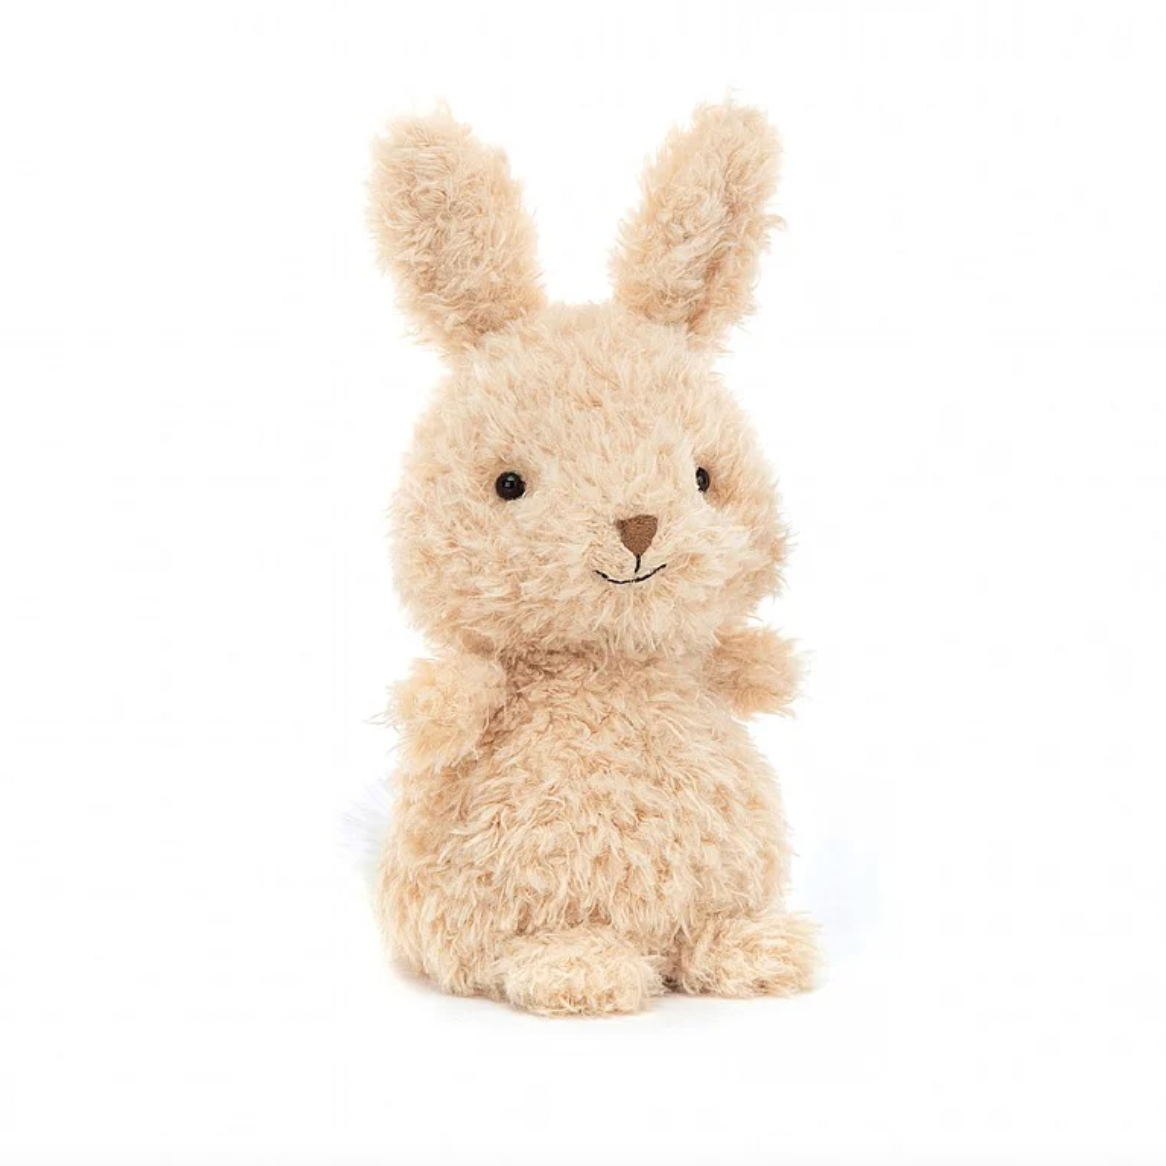 Jellycat Bunnies - (Several Options)